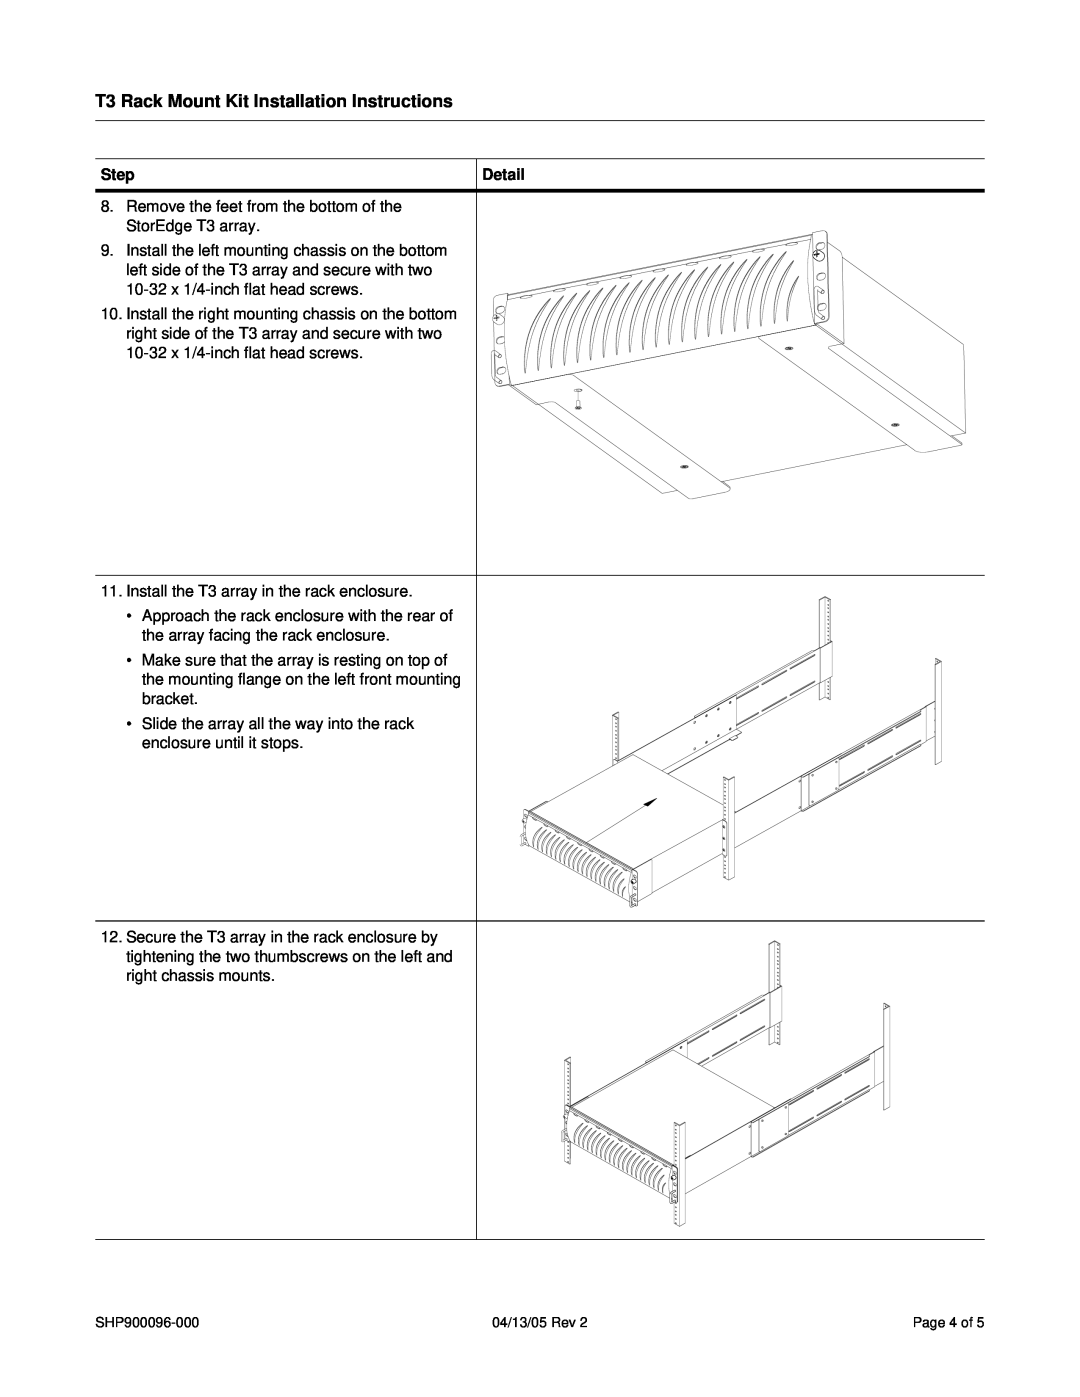 SharkRack T3-R19-H T3 Rack Mount Kit Installation Instructions, Step, Install the T3 array in the rack enclosure, Detail 